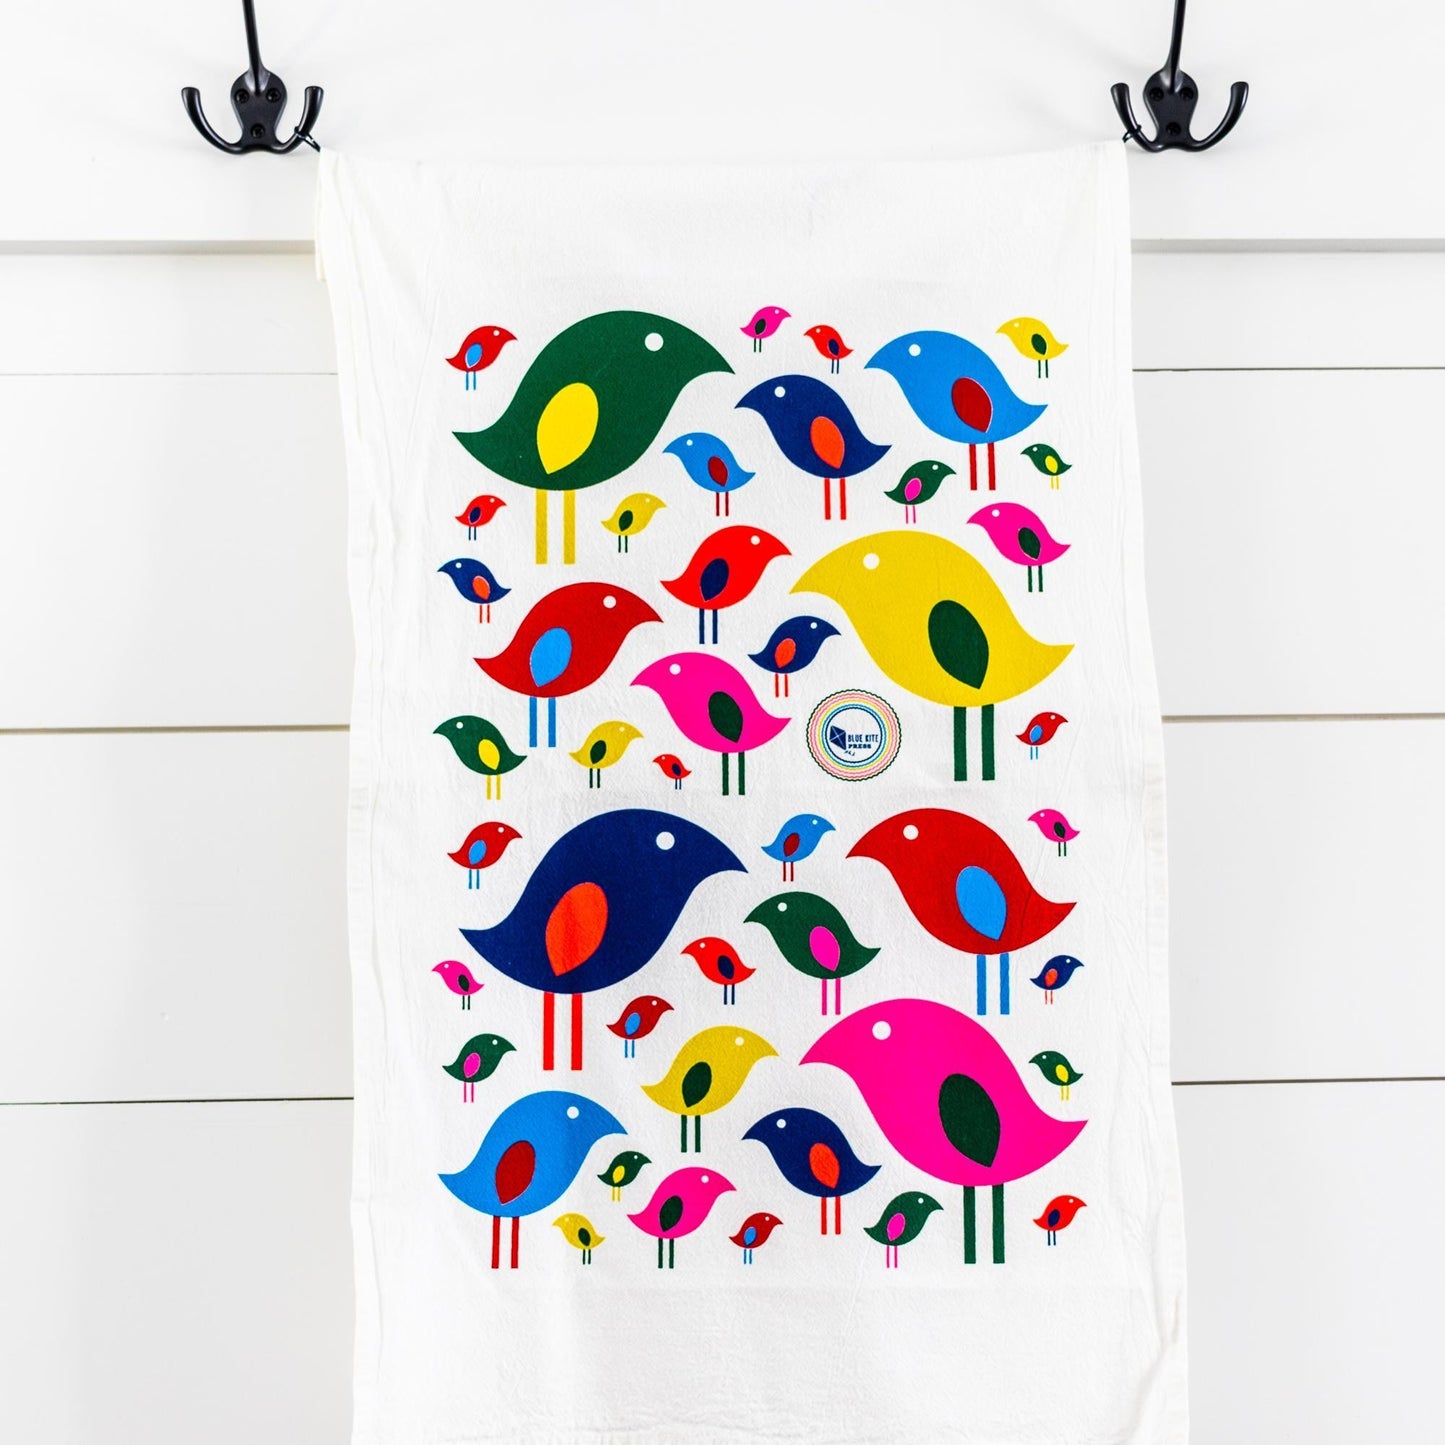 Bright Bird Tea Towel in White and Natural Flour Sack